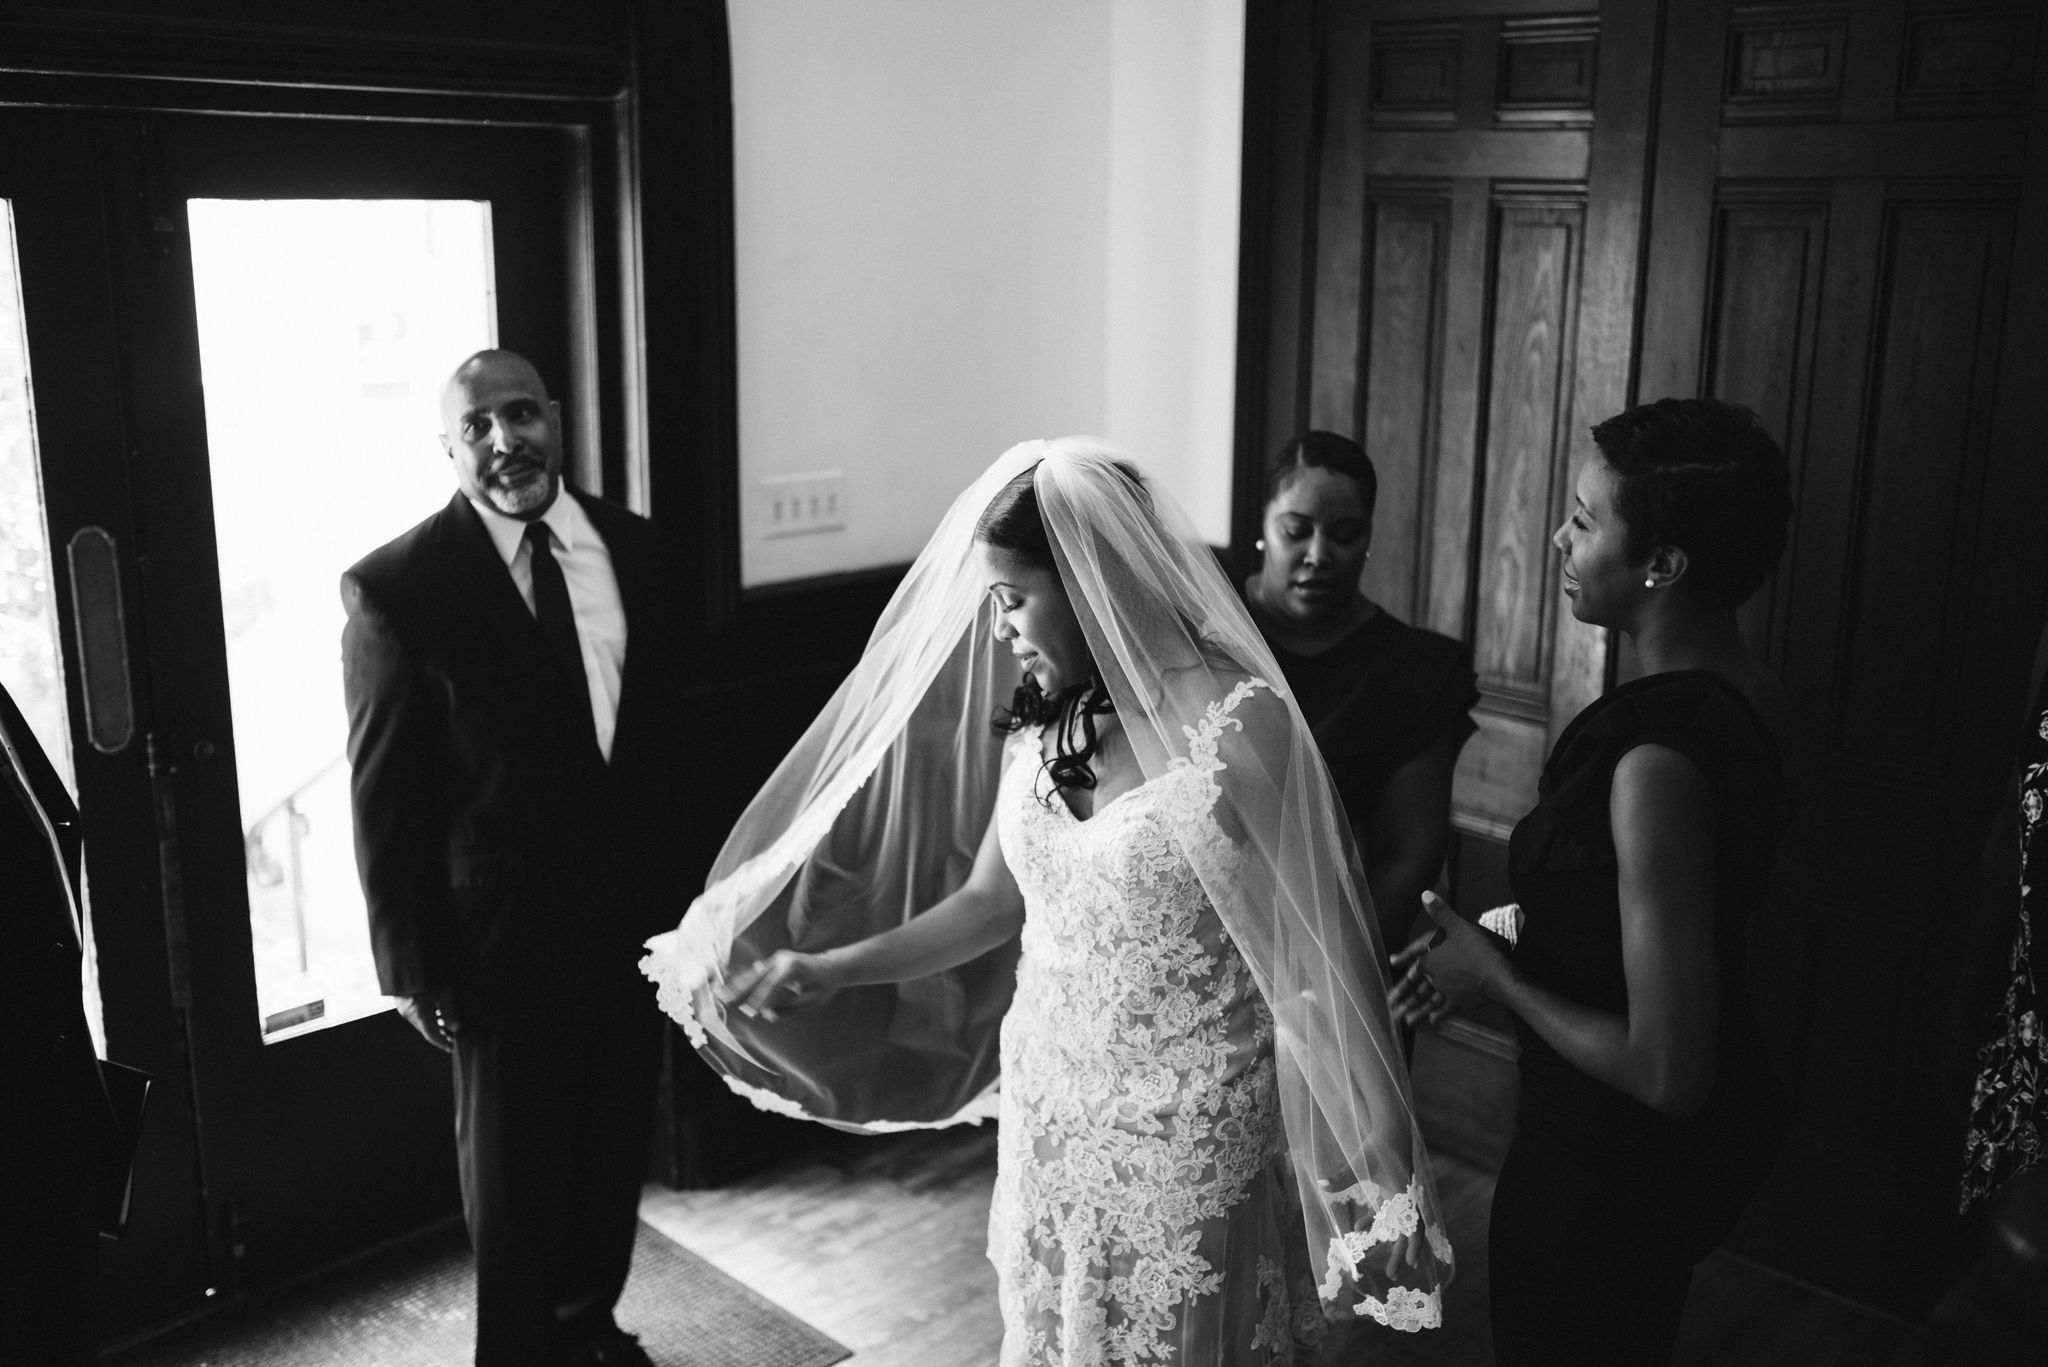  Baltimore, Maryland Wedding Photographer, Mount Vernon, Chase Court, Classic, Outdoor Ceremony, Garden, Romantic, Bride Getting Ready Before Ceremony, Black and White Photo, Lace Wedding Dress 